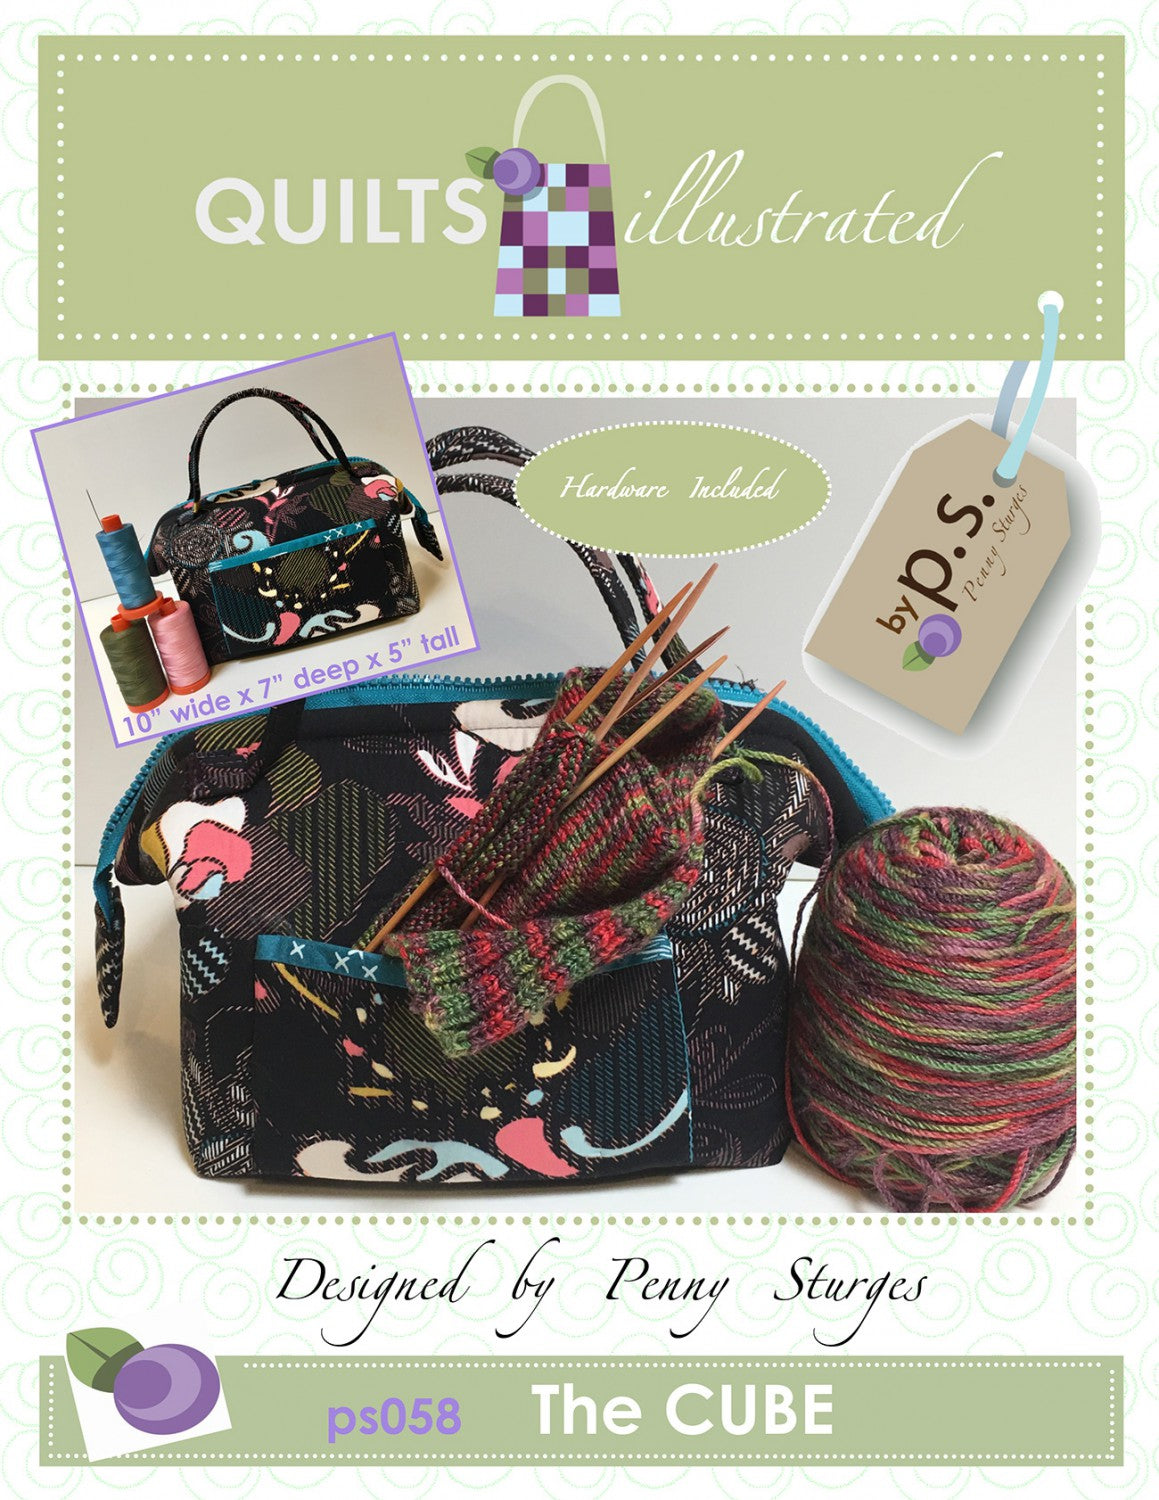 The Cube Sewing Pattern and 2 Metal Stays by Peggy Sturges for Quiltsillustrated